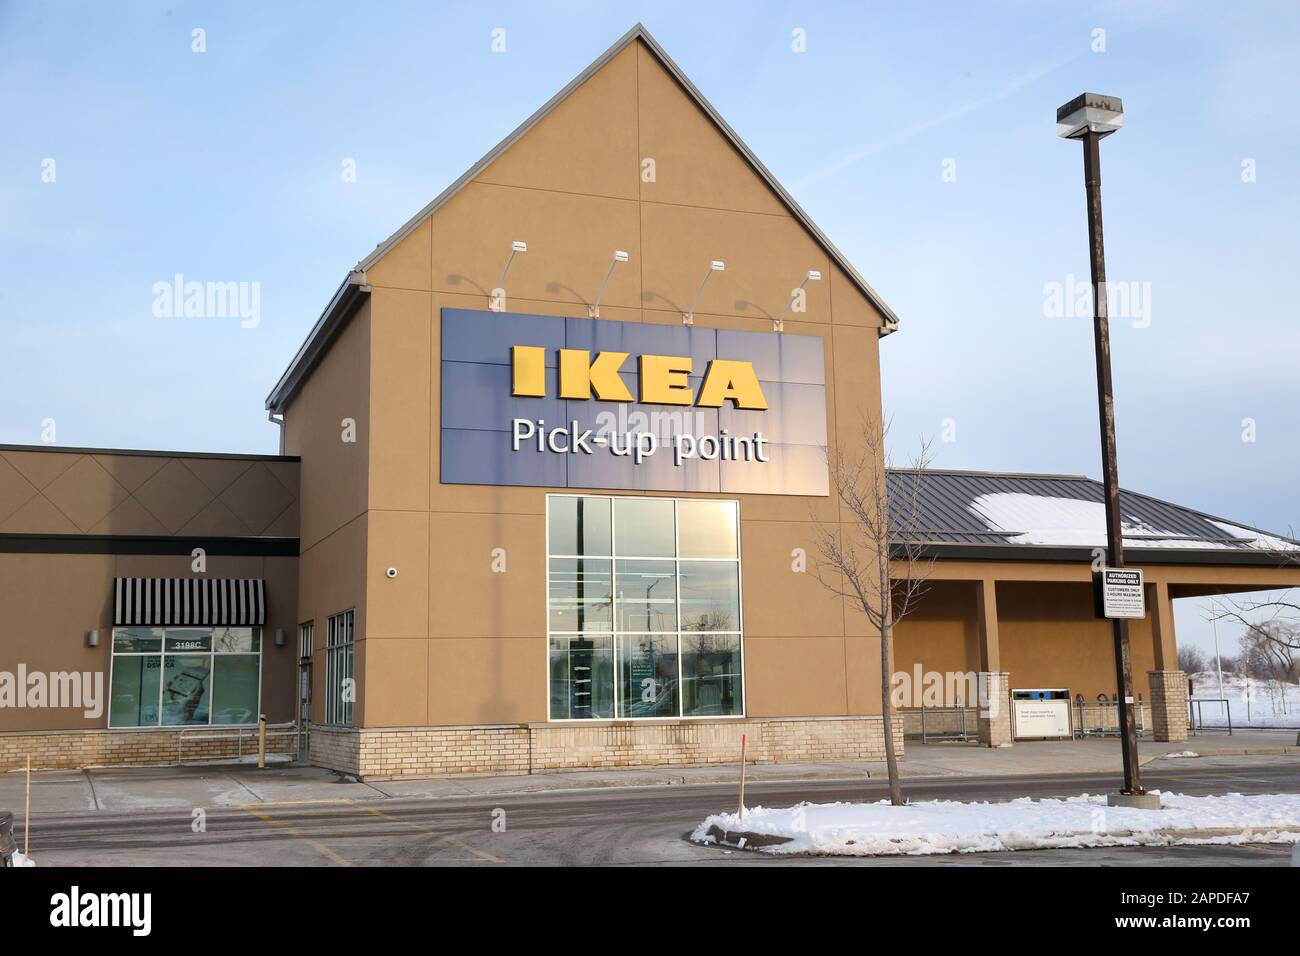 22nd of January 2020, London Ontario Canada. IKEA announces they will close  IKEA pickup point locations in Kitchener, London, St. Catharines, Whitby  and Windsor on Jan 29 2020. IKEA still has not